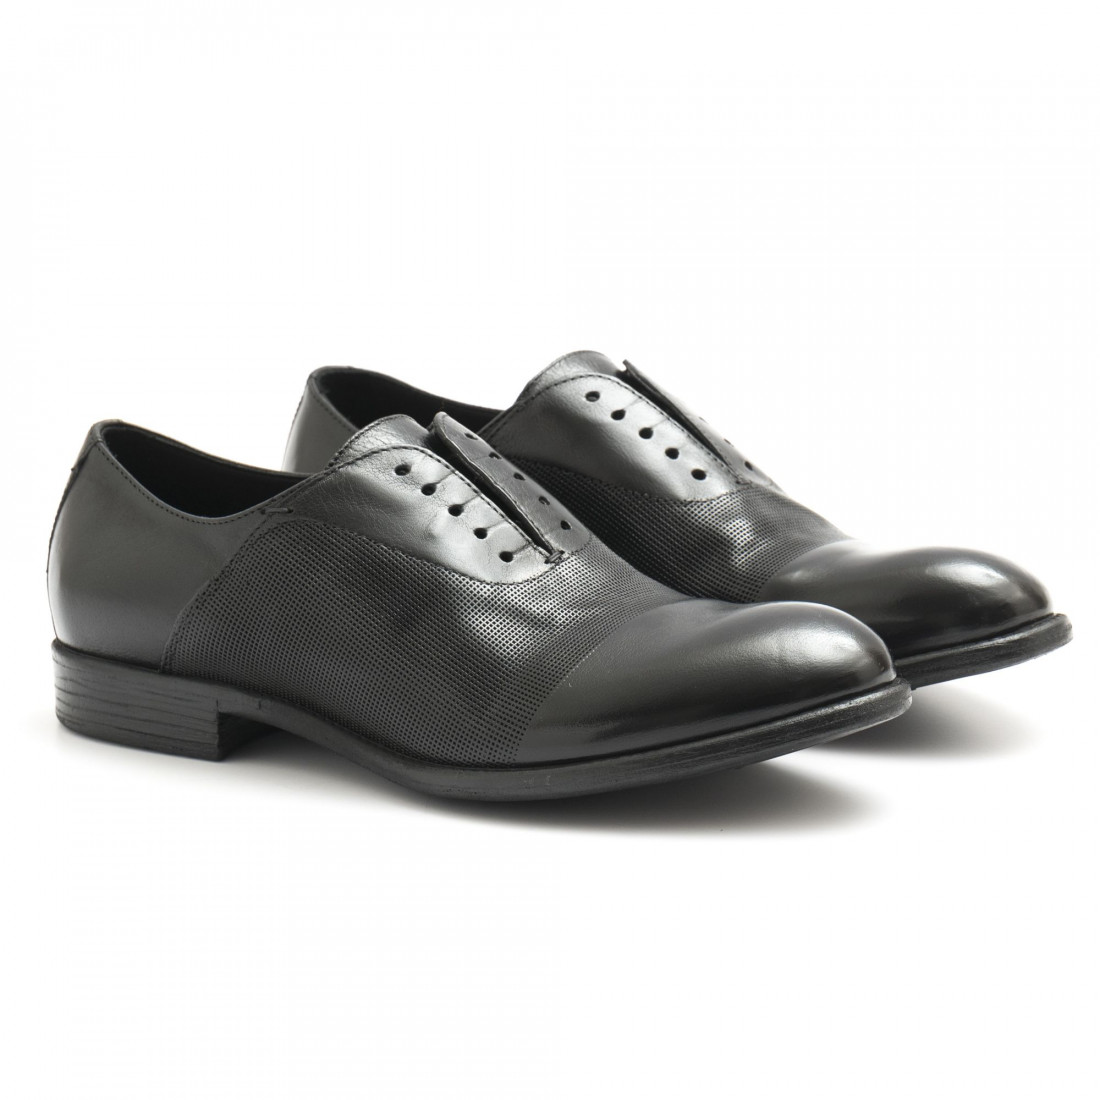 Black perforated leather Hundred 100 oxford shoes